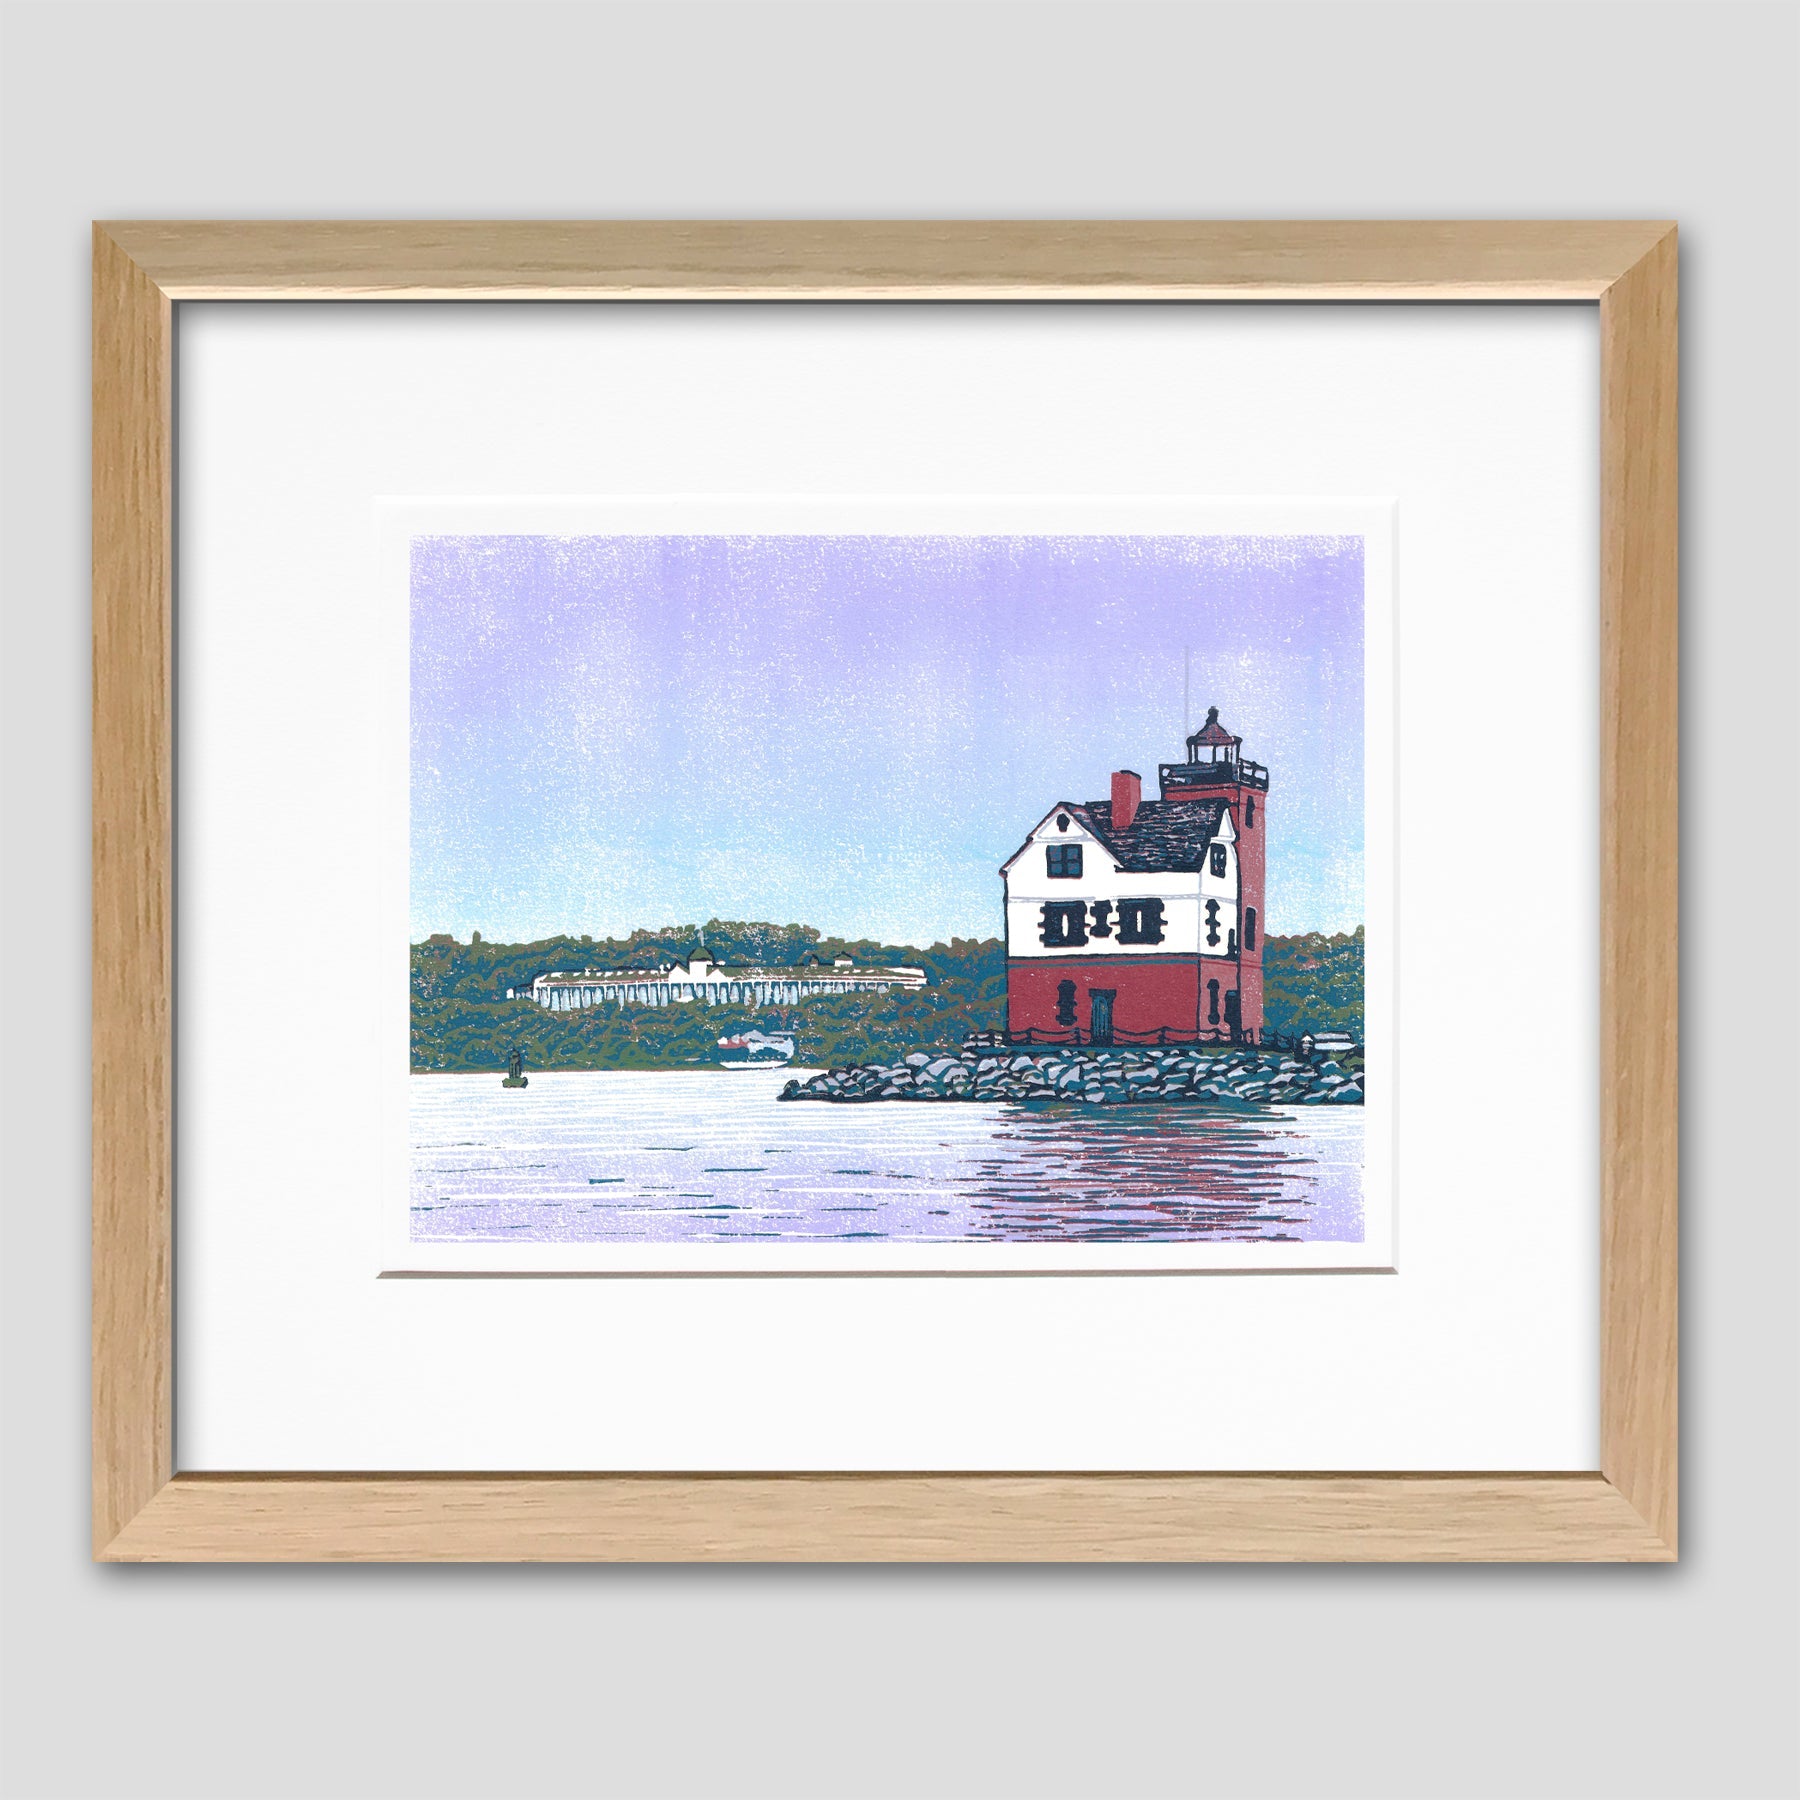 Framed lighthouse art created by Natalia Wohletz of Peninsula Prints, Mackinac Island.  Rounding the Island is an 8-color reduction block print featuring a unique view of Round Island Lighthouse with Grand Hotel in the background.